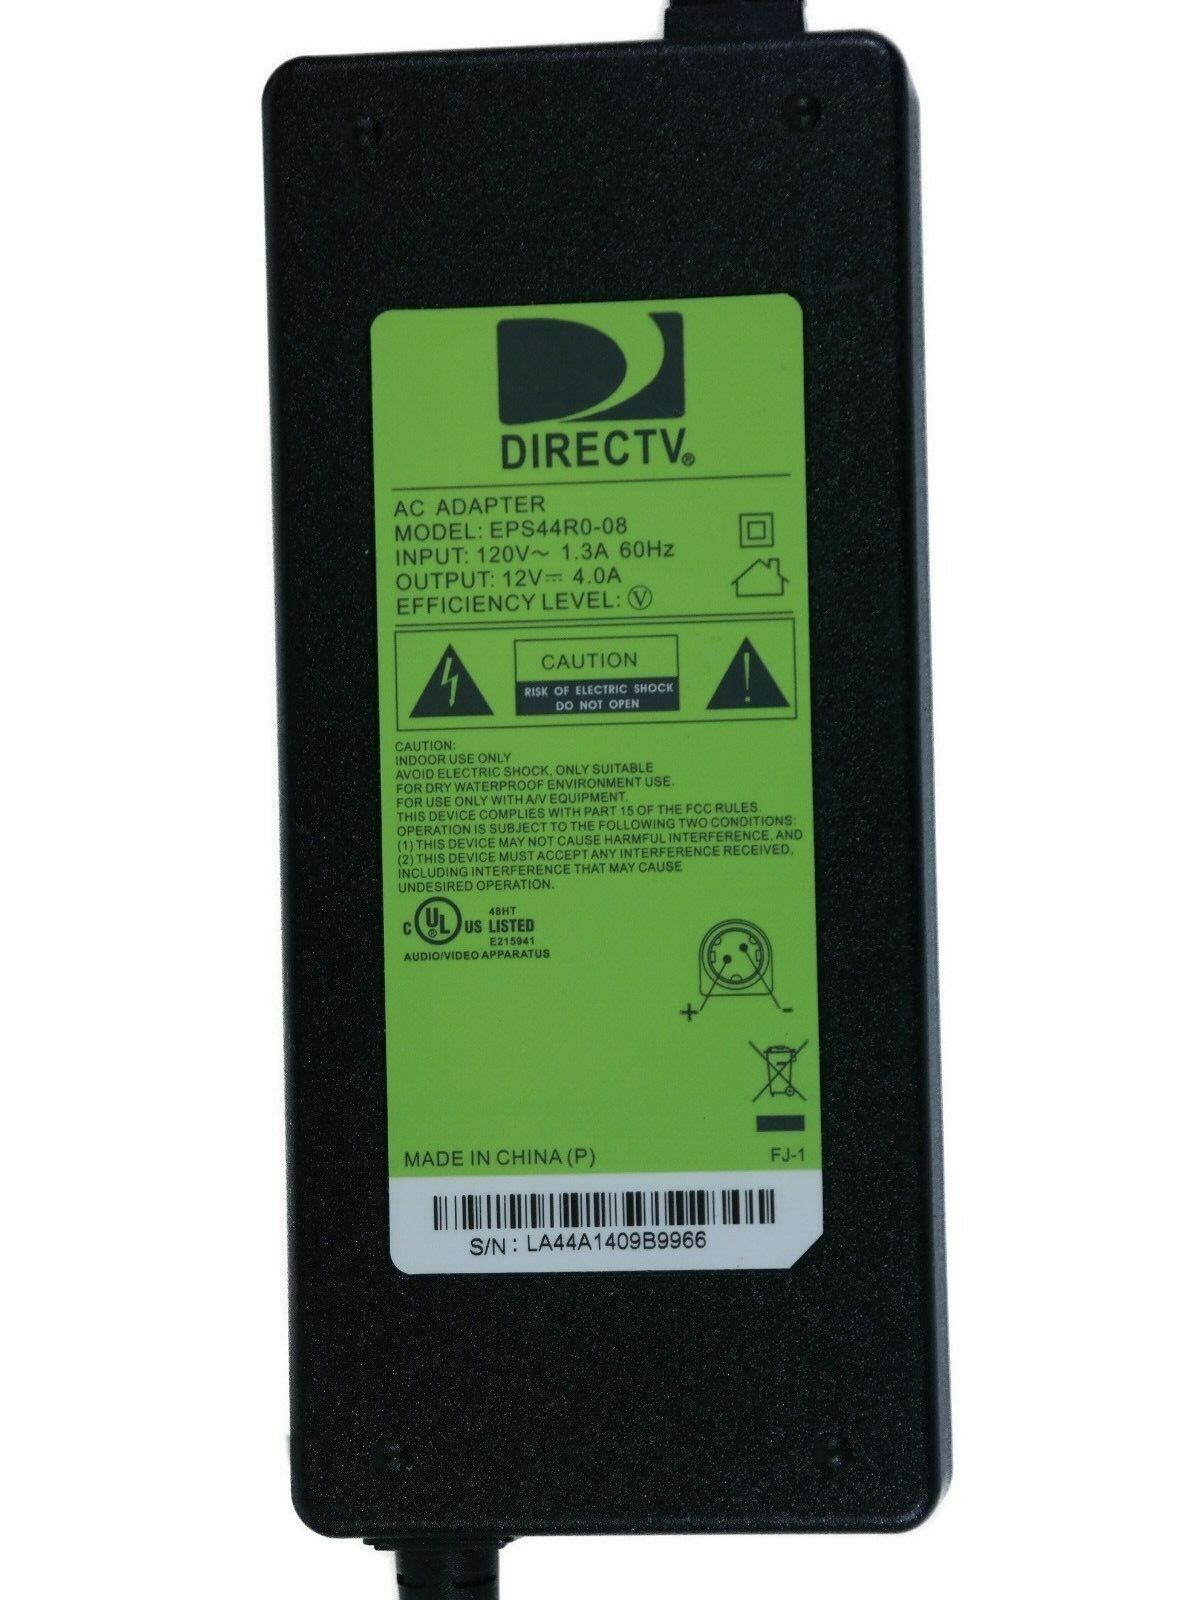 NEW 12V 4A DIRECTV EPS44R0-08 AC Adapter